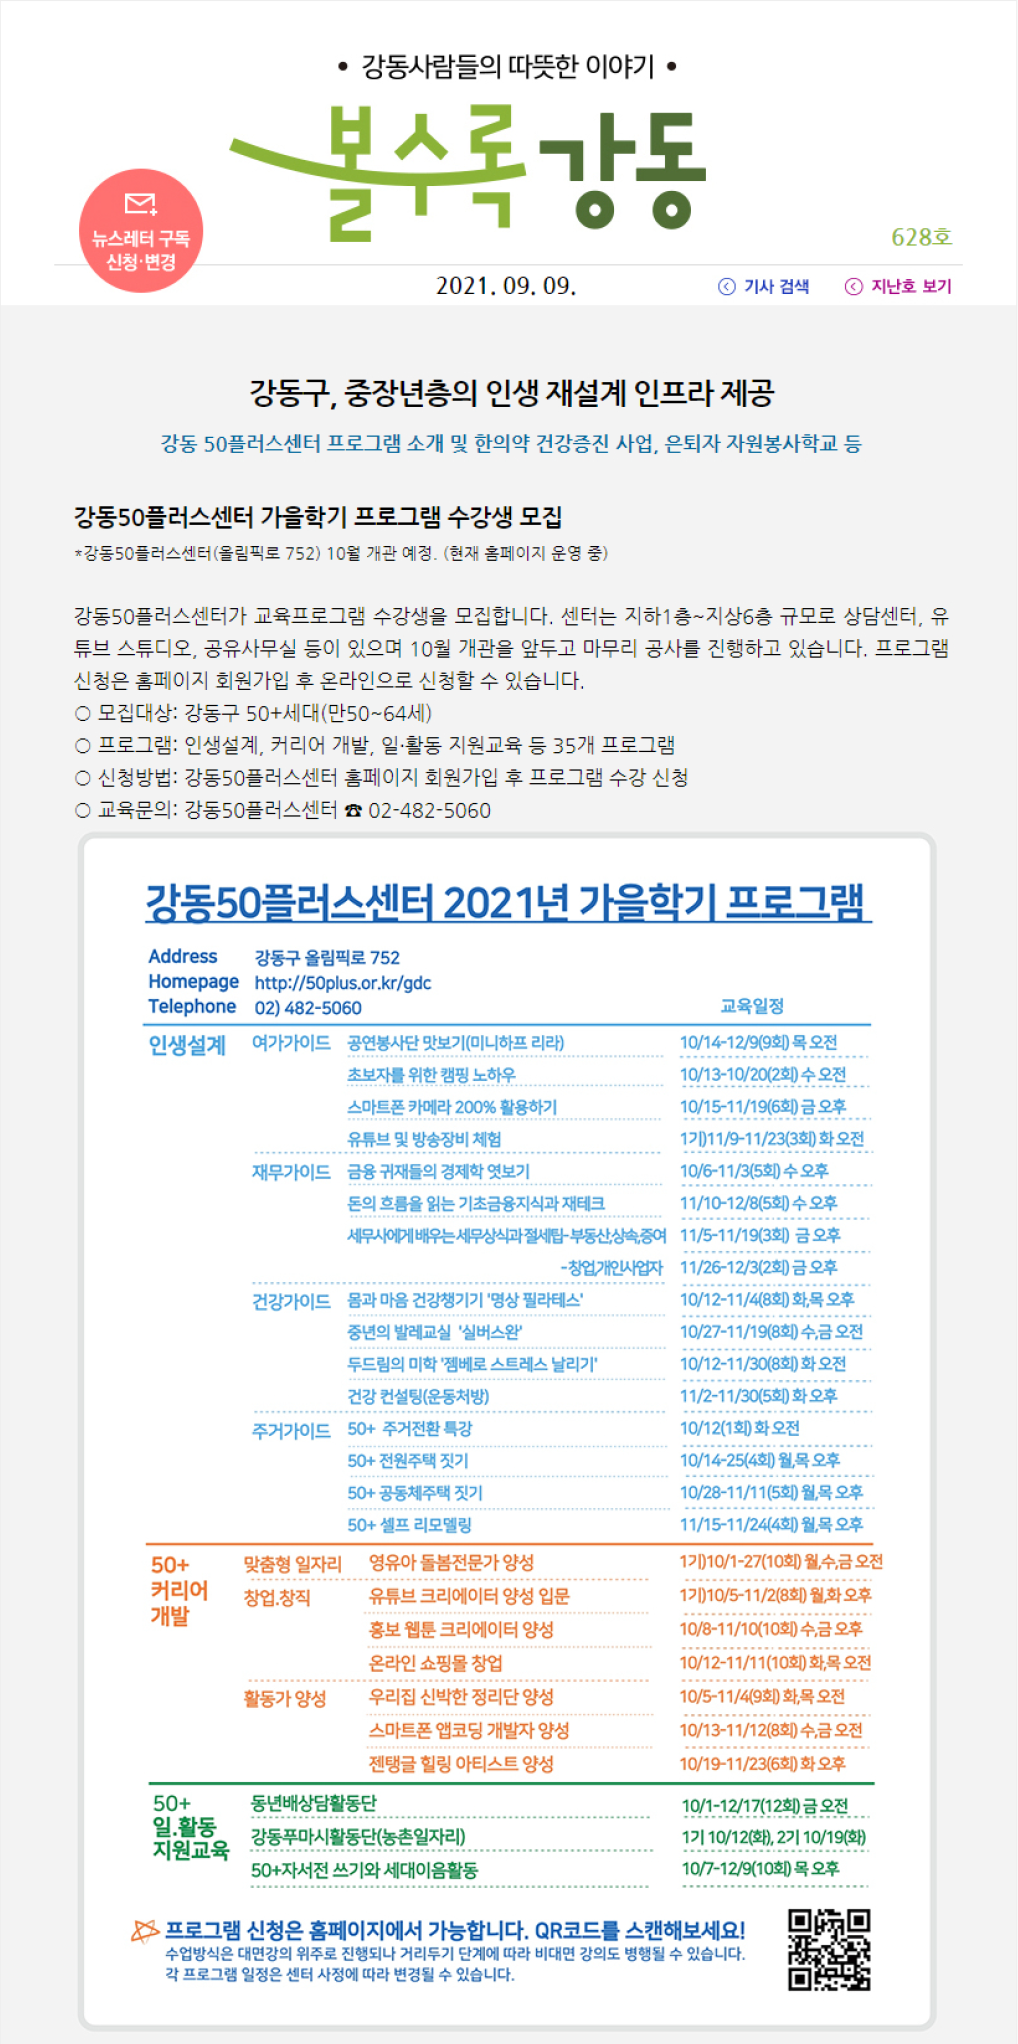 screencapture-news-gangdong-go-kr-enewspaper-articleview-php-2021-09-23-11_29_44-1.png